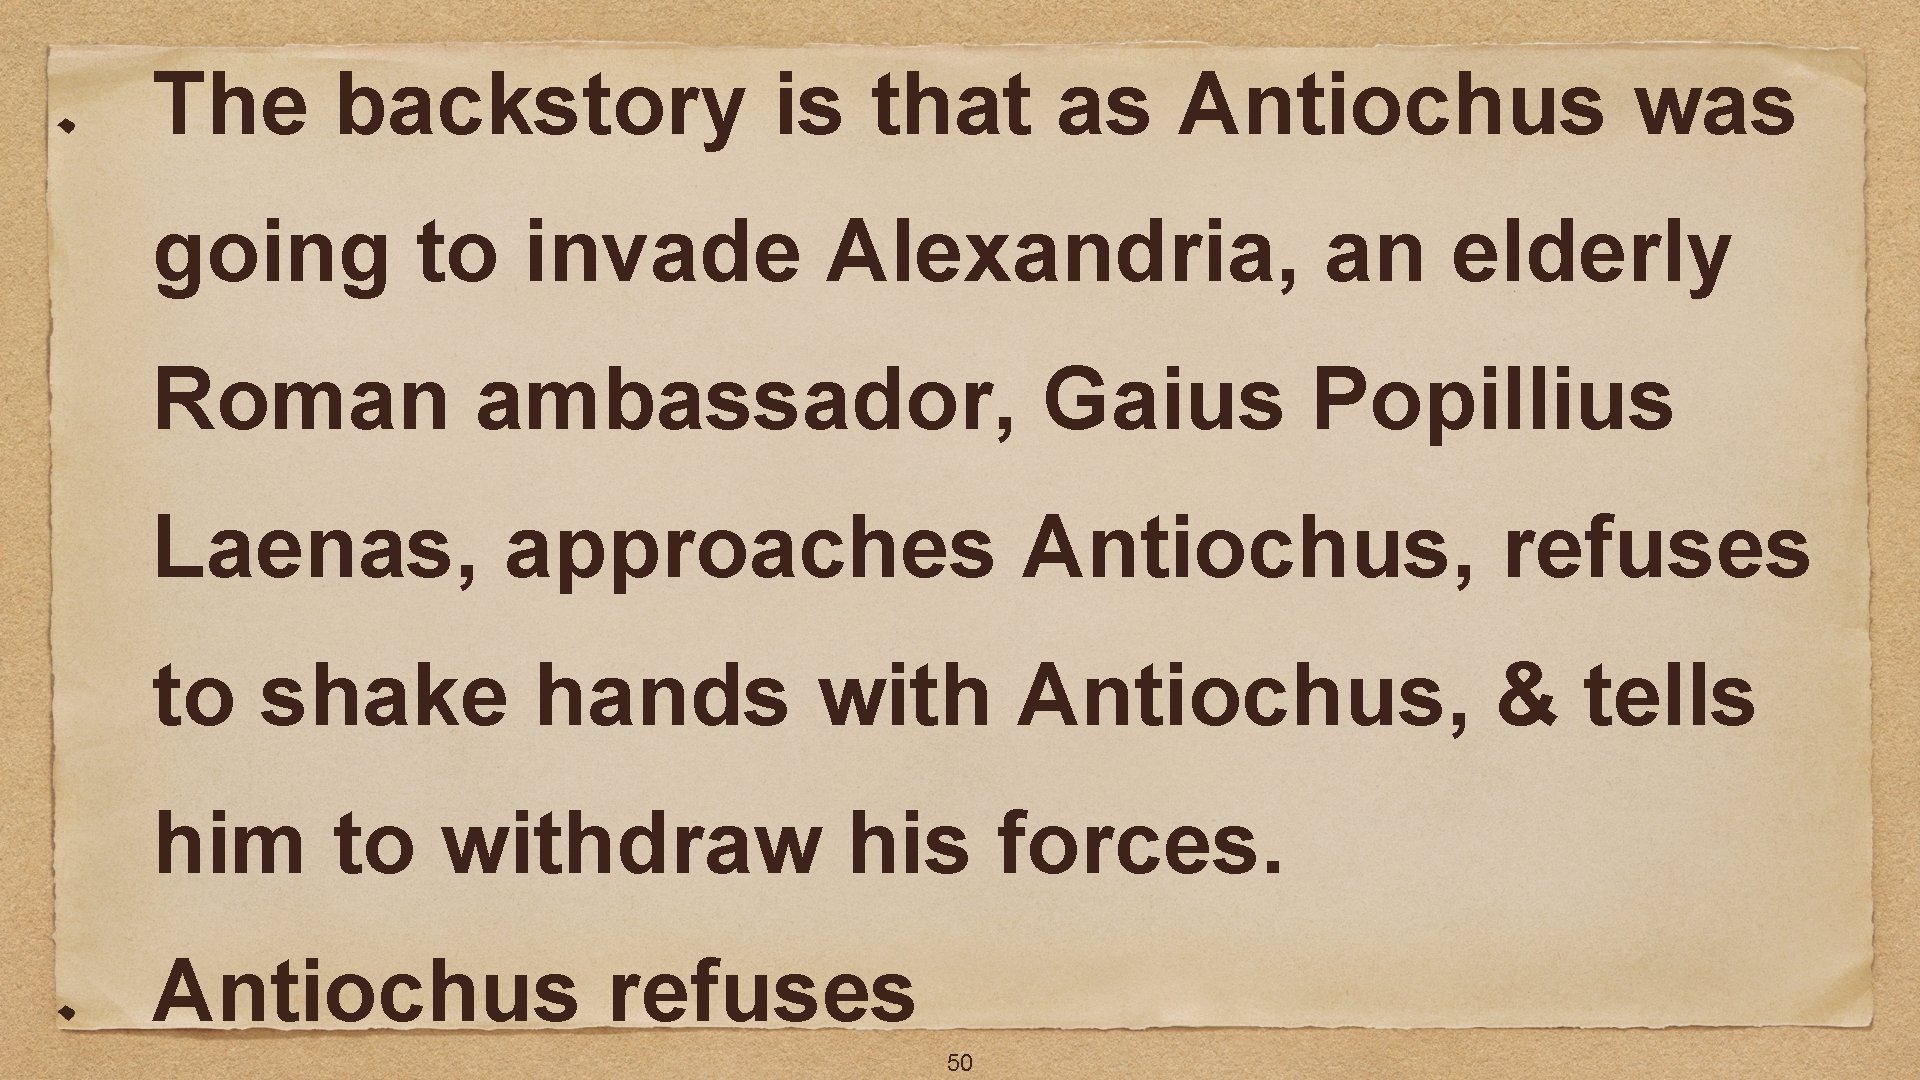 The backstory is that as Antiochus was going to invade Alexandria, an elderly Roman